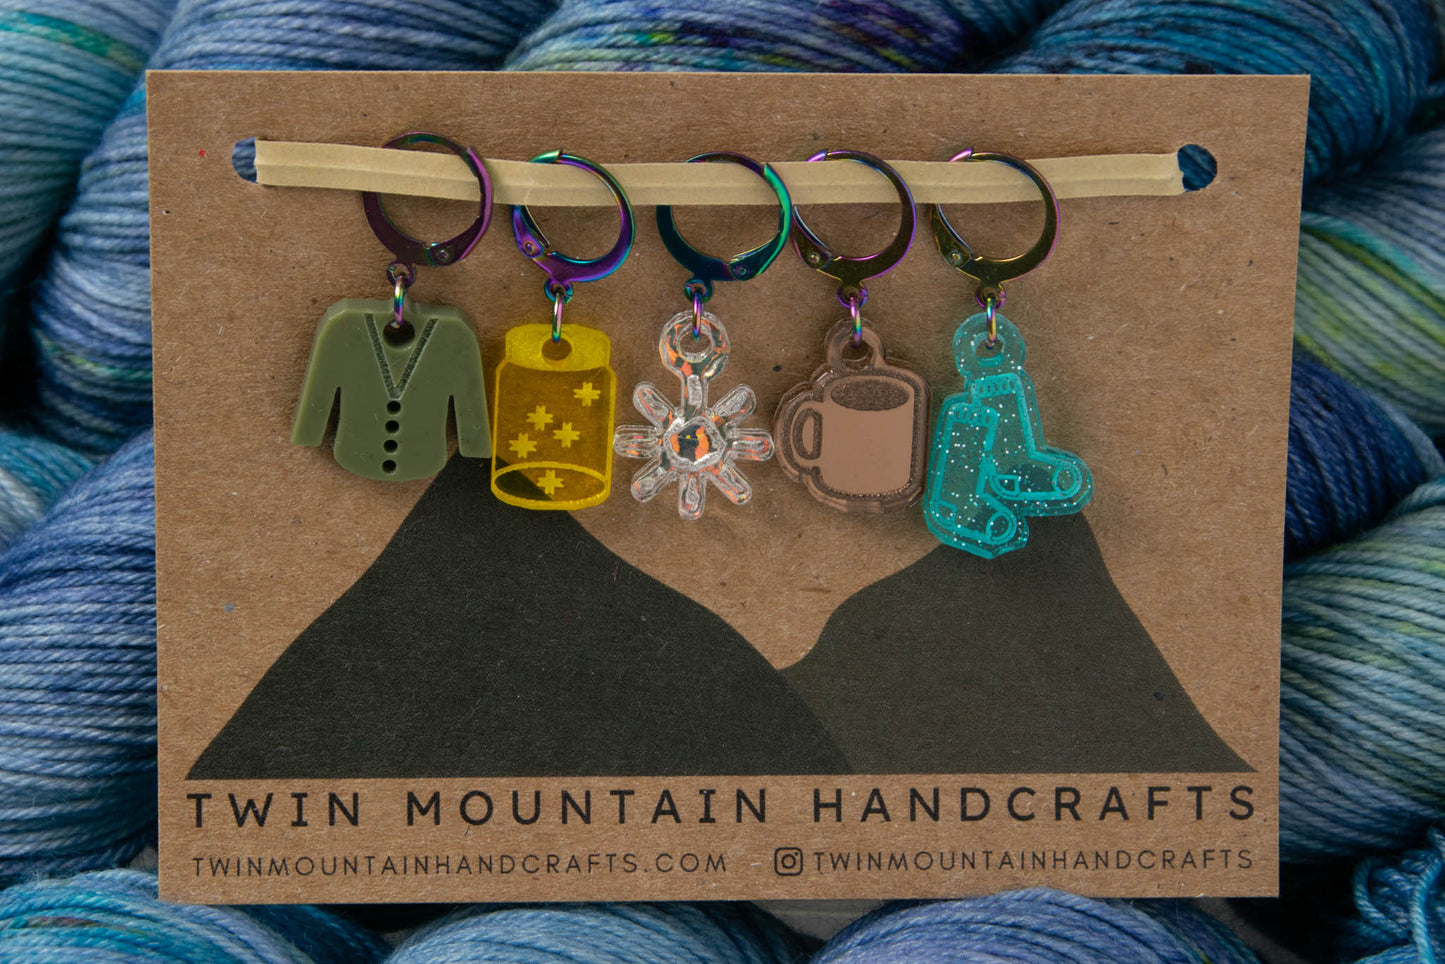 Five stitch markers with rainbow clasps: a green cardigan, a yellow jar with stars in it, an iridescent sun, a tan cup of coffee, and blue sparkly socks.